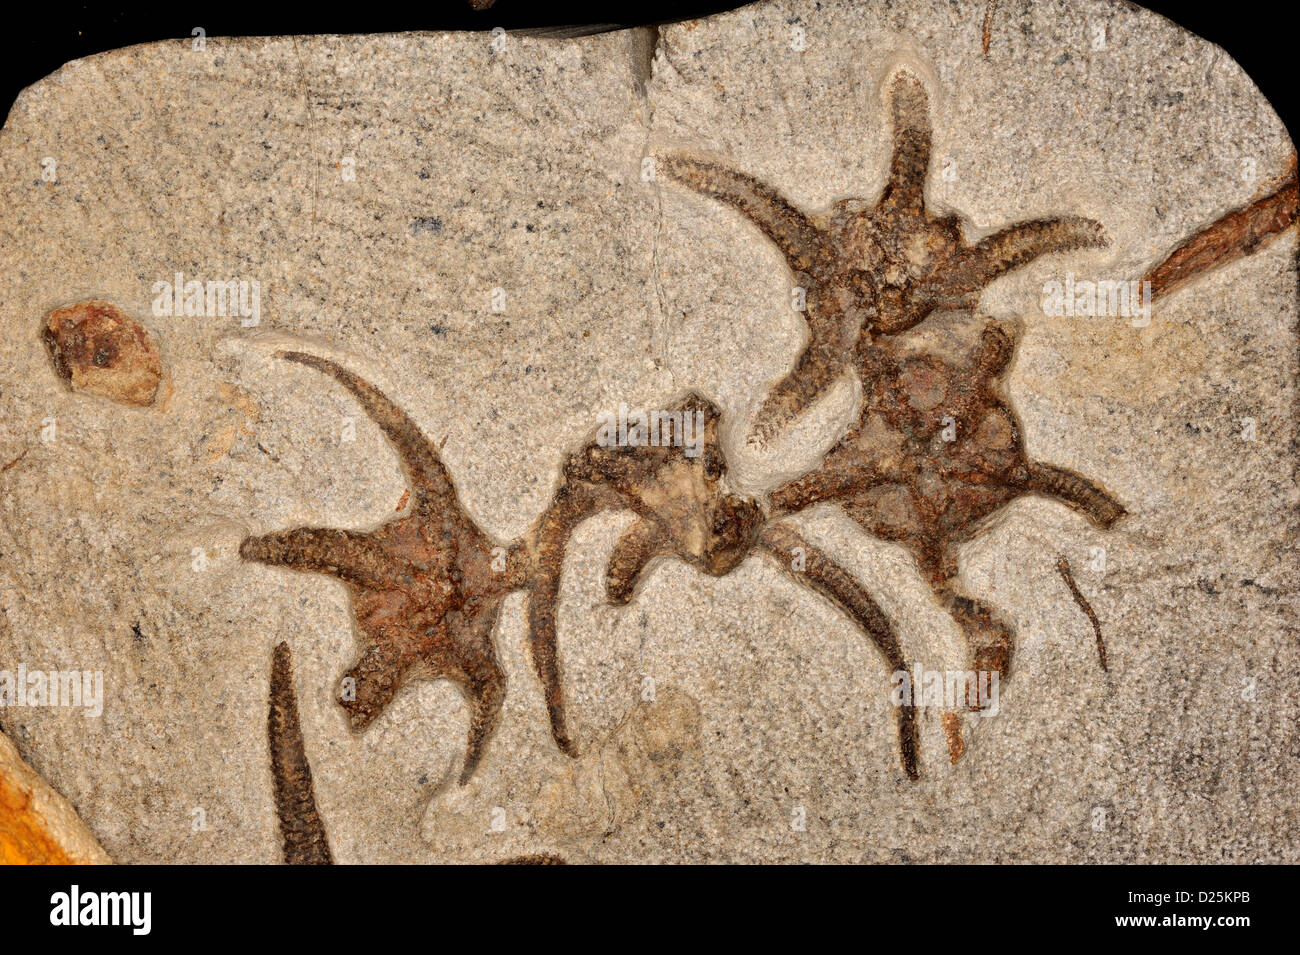 Fossil Brittle Sea Star, Ophiuroides sp., Ordovician Period Stock Photo